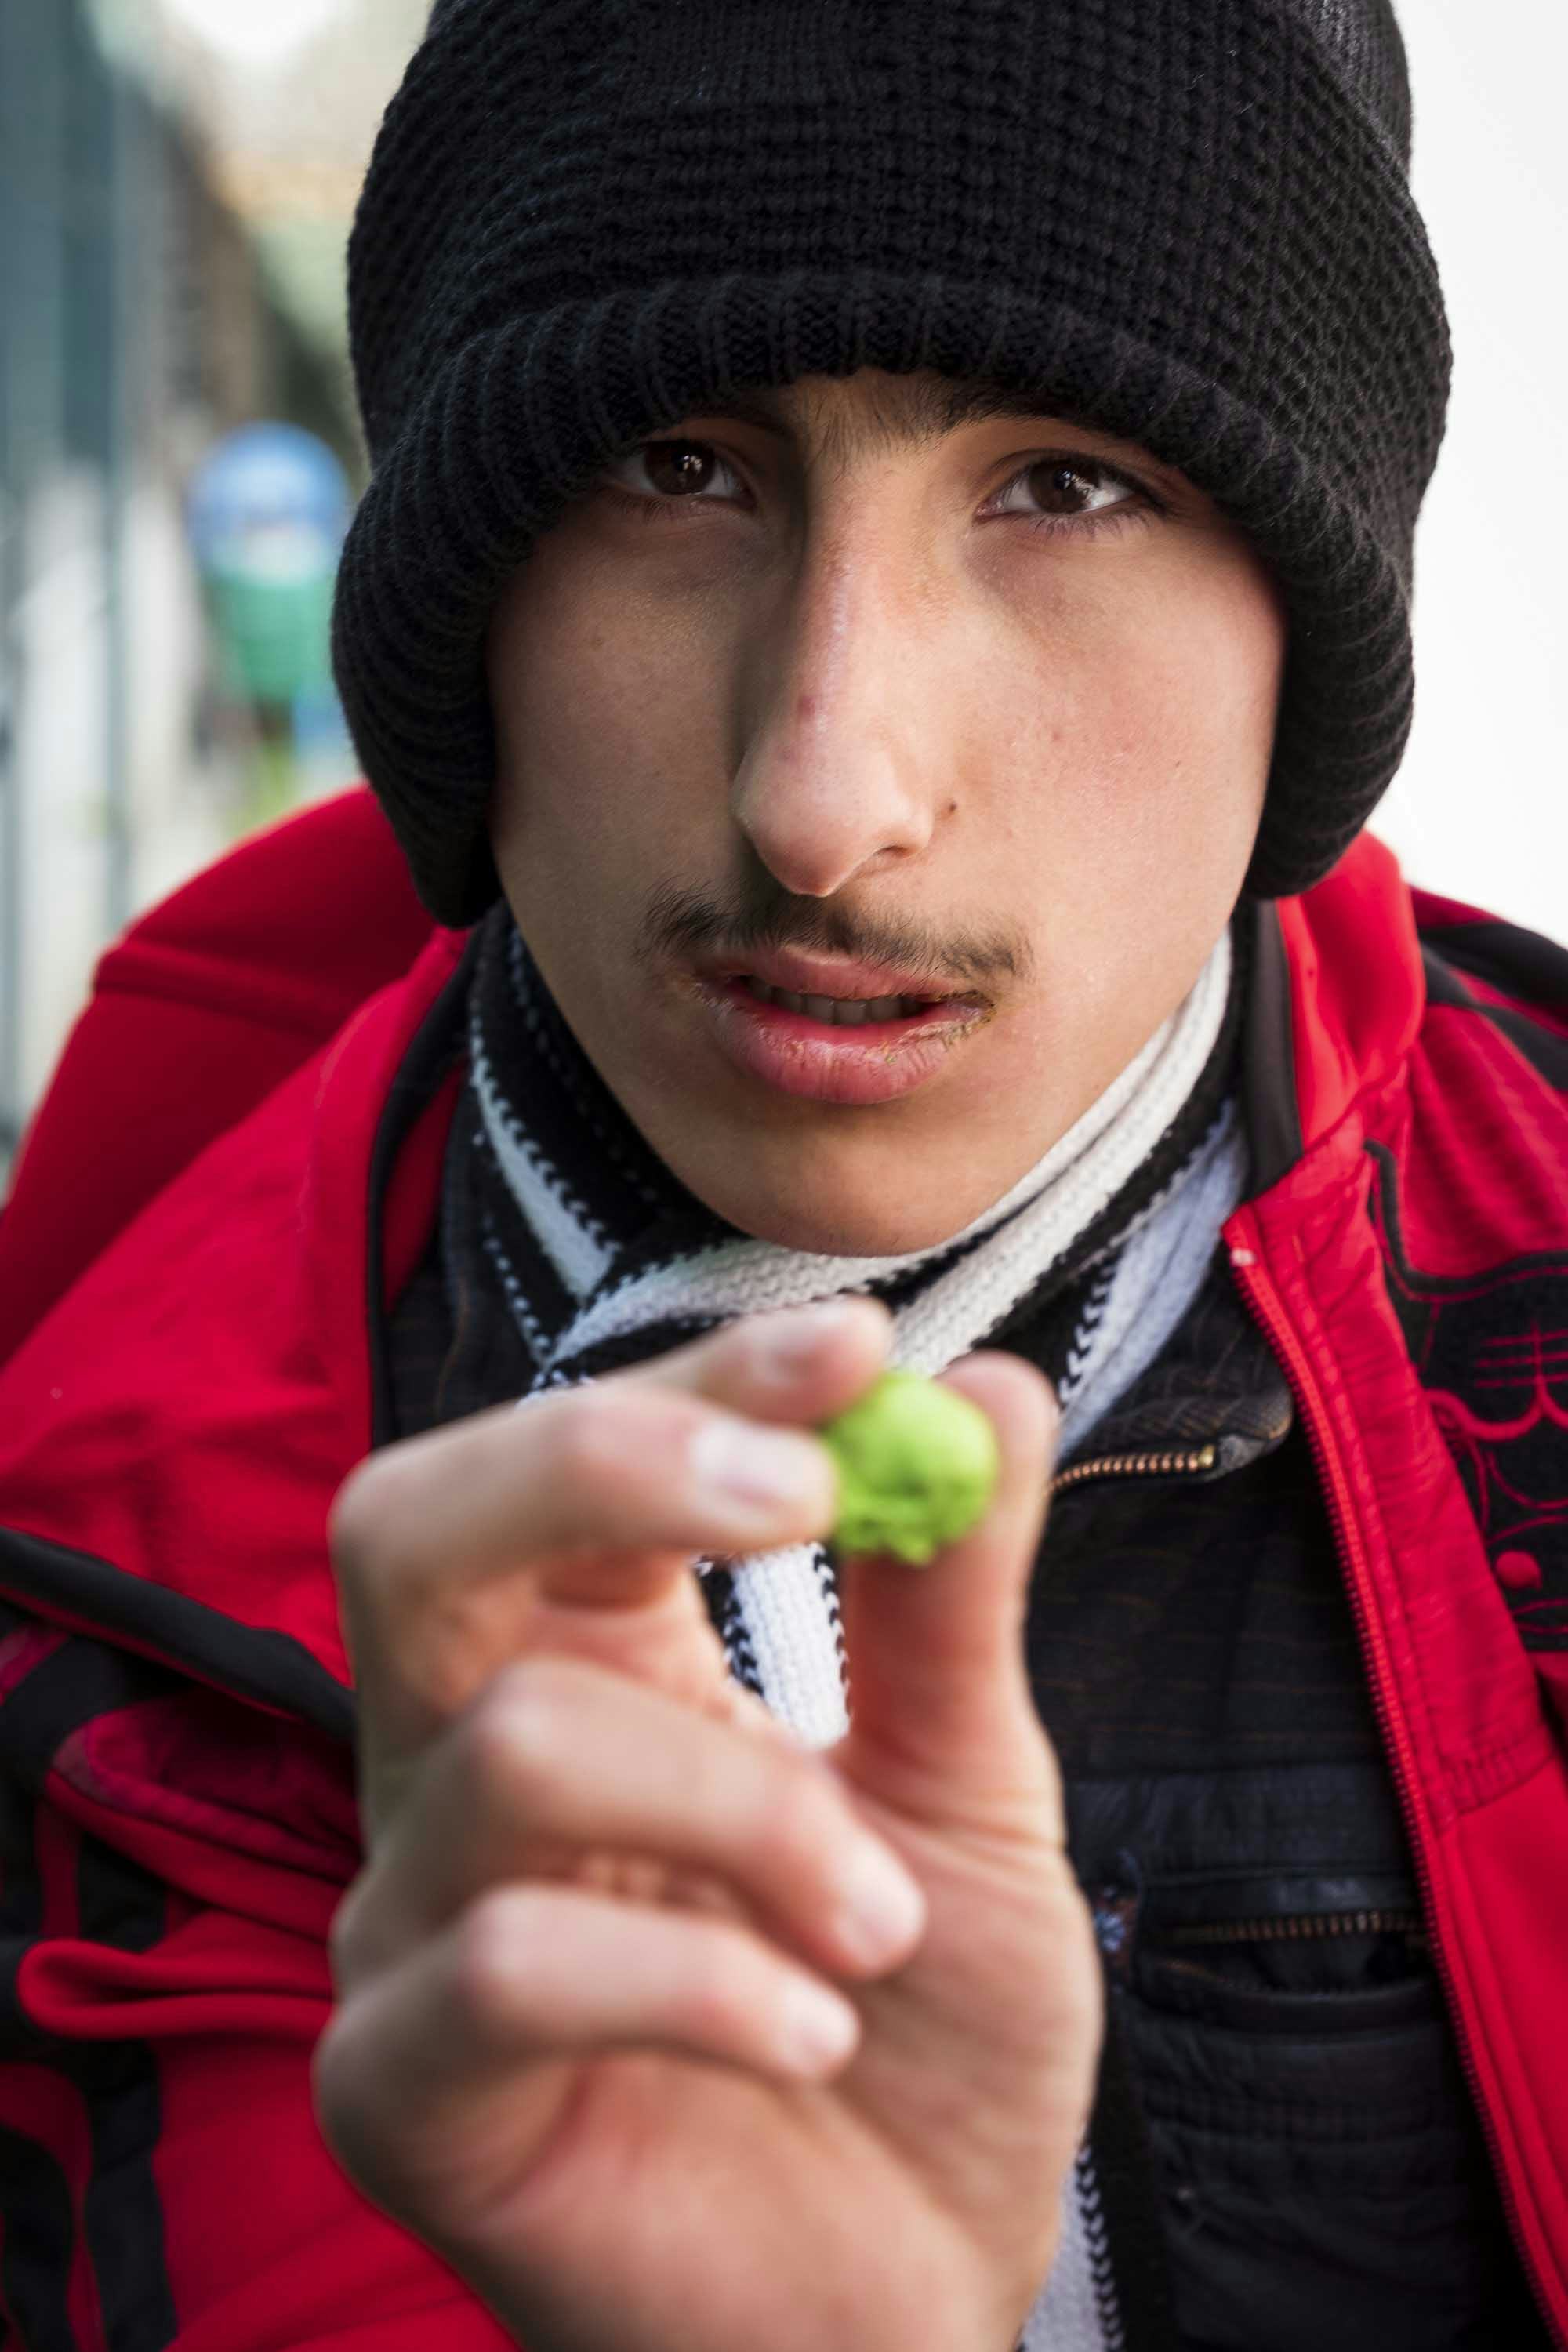 Portrait of a boy wearing a red jacket, holding up a small green token. © Oğulcan Arslan